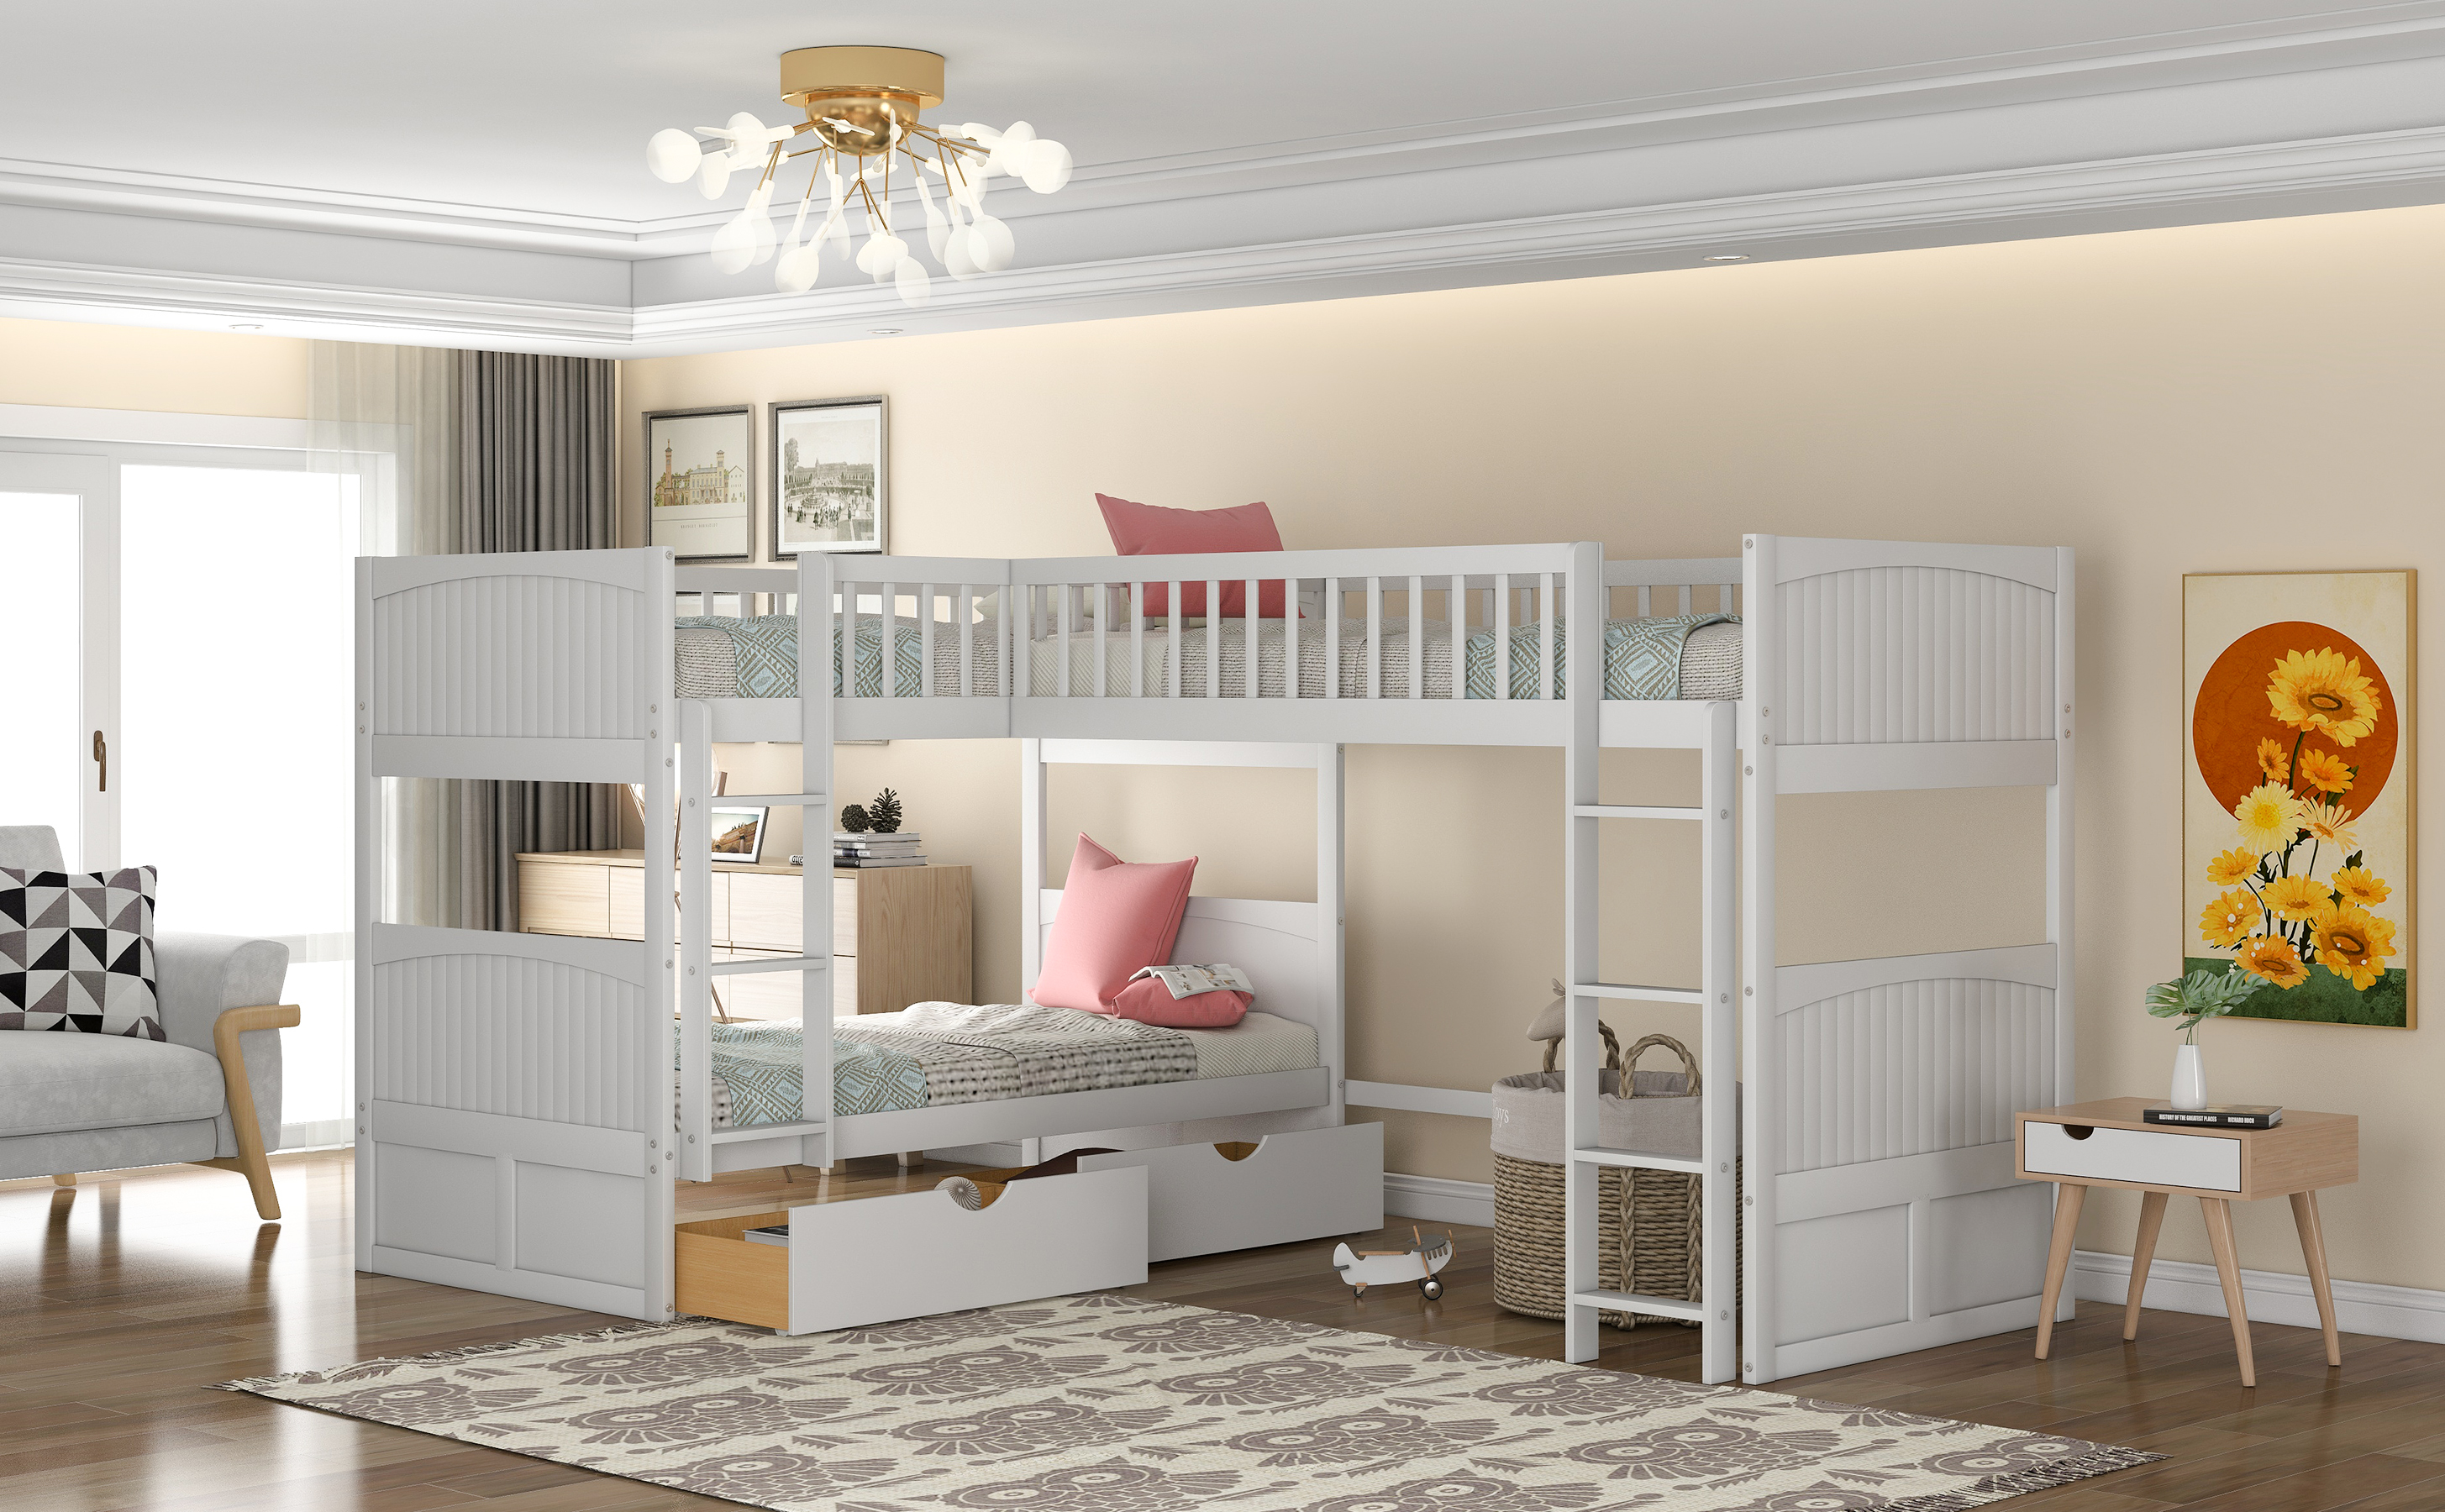 Euroco Wood Bunk Bed Storage, Twin-over-Twin-over-Twin for Children's Bedroom, White - image 3 of 12